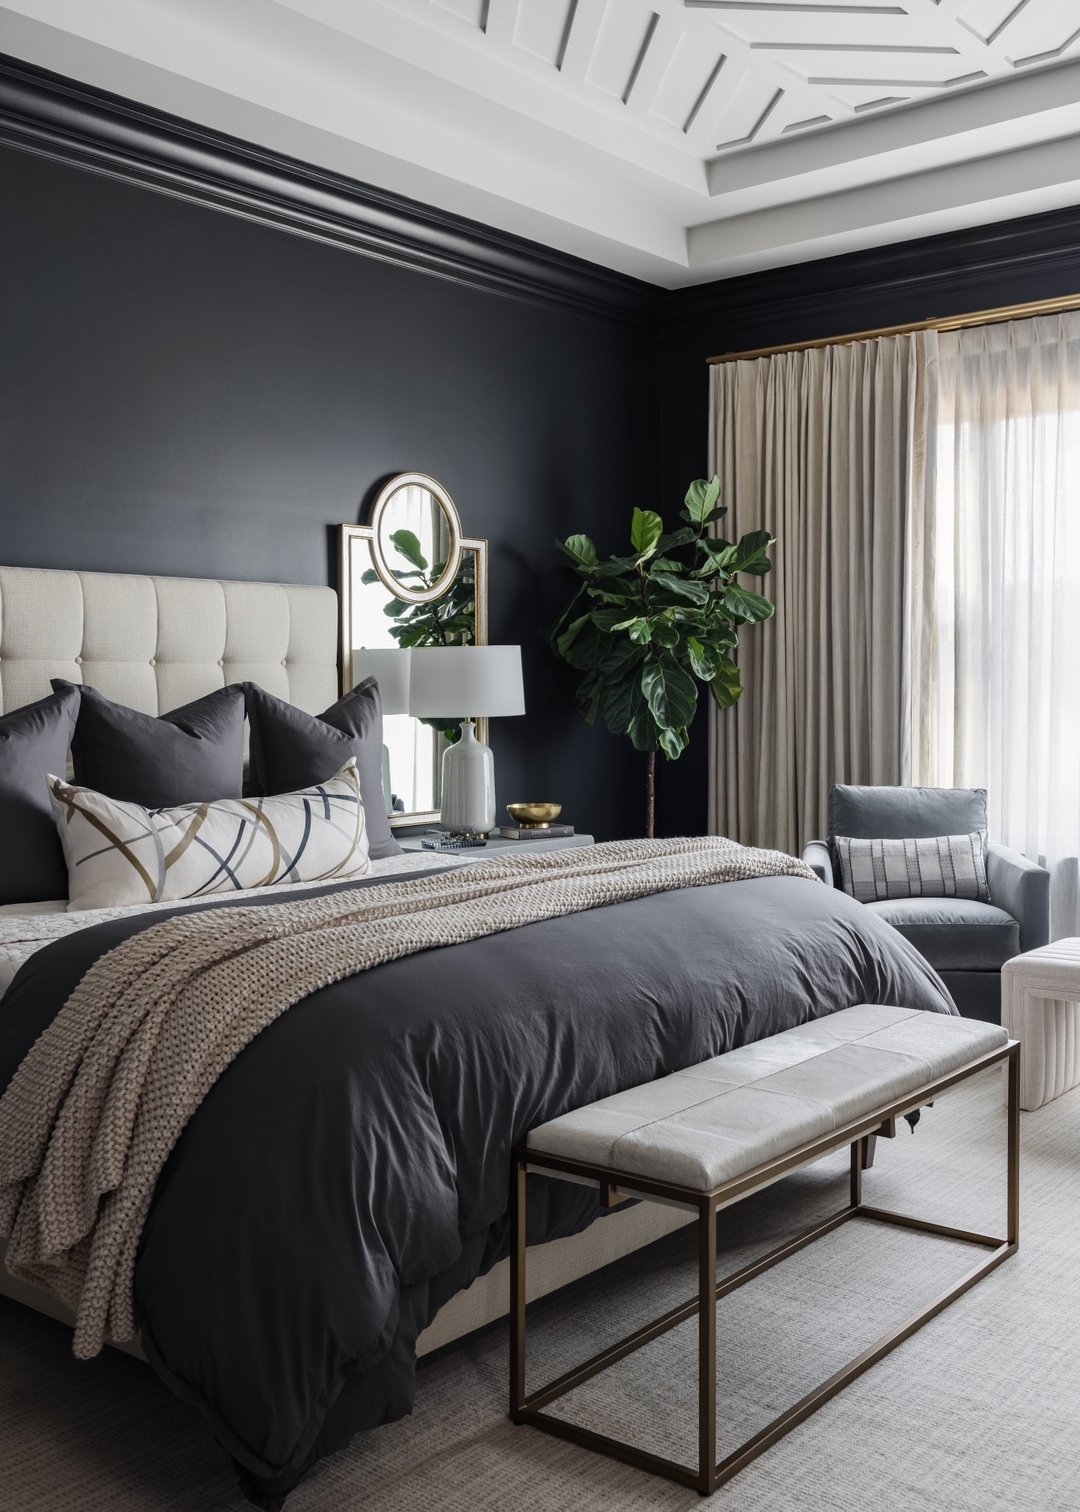 Our client wanted their bedroom transformed into a space that felt like a cozy hotel room. We paired light and dark elements together with luxe drapery to do just that! ✨ Swipe to see the before 🙈 

#perchinteriors #houseinspiration #interiordesign 